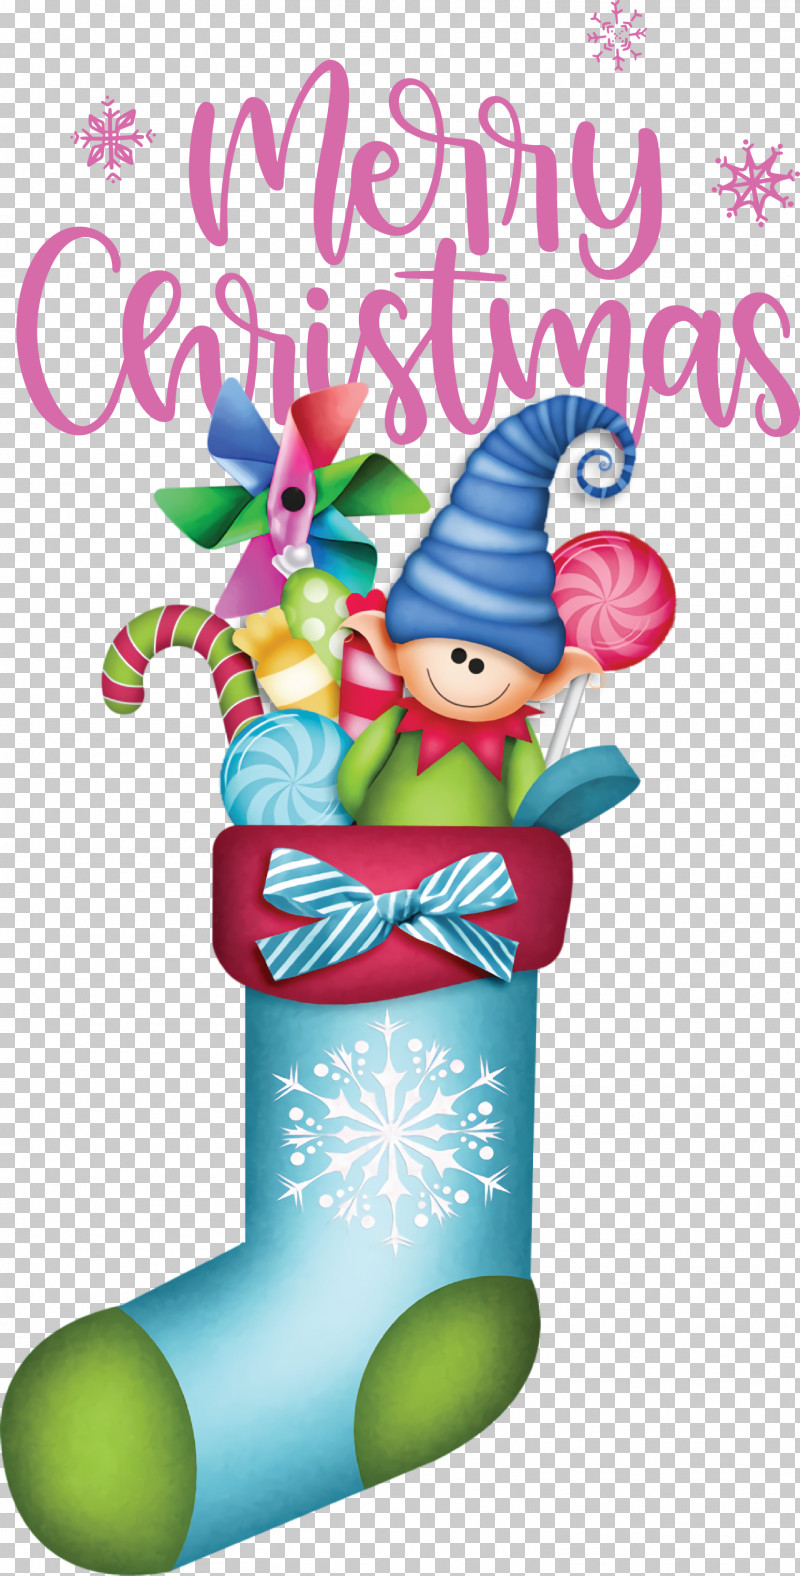 Merry Christmas Christmas Day Xmas PNG, Clipart, Cartoon, Christmas Day, Christmas Elf, Christmas Stocking, Christmas Stocking Christmas Free PNG Download